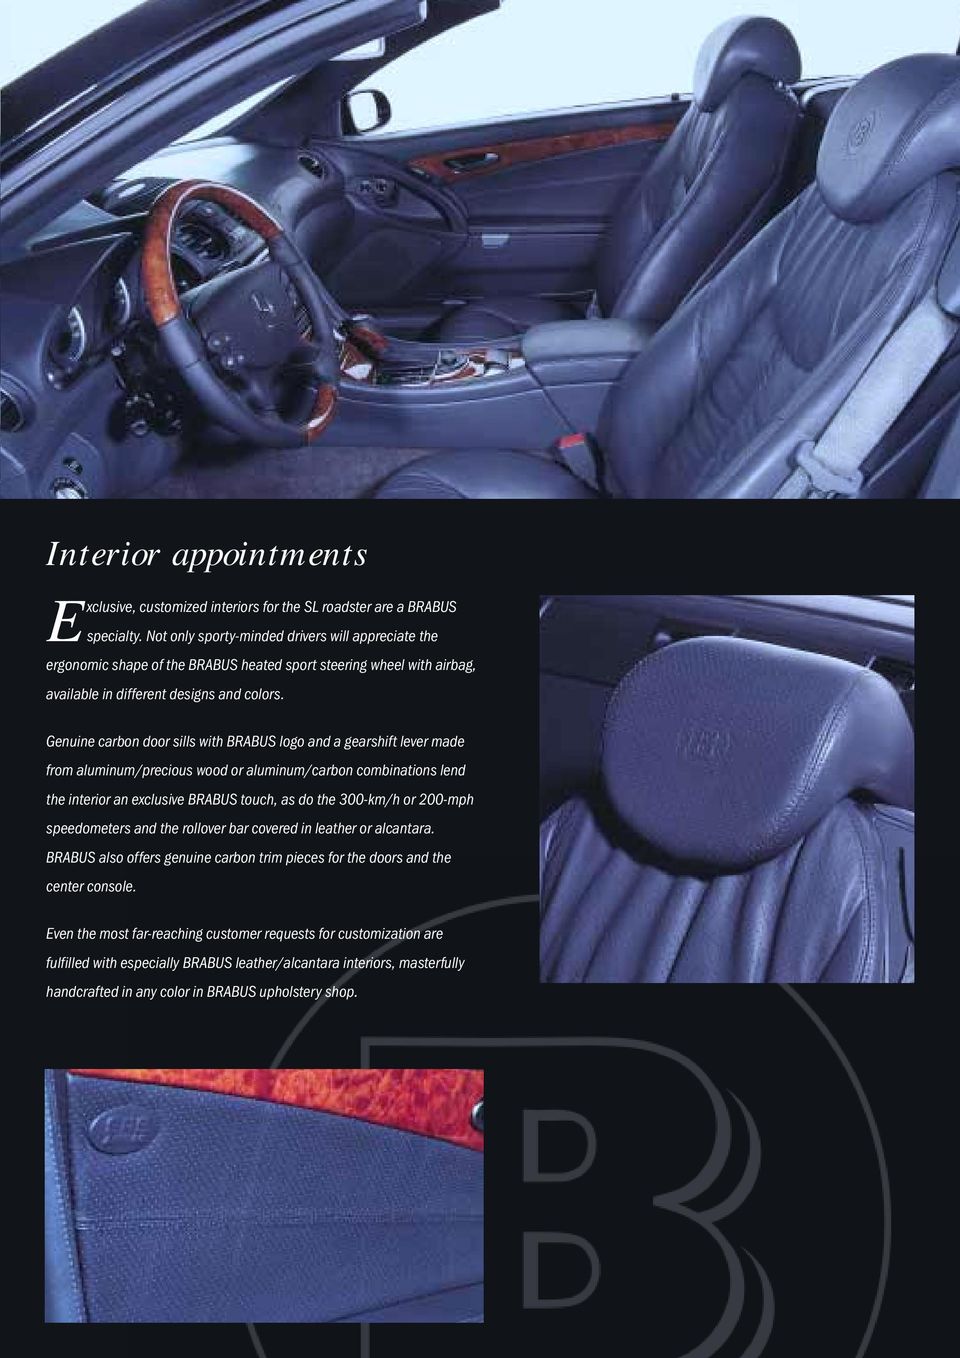 Genuine carbon door sills with BRABUS logo and a gearshift lever made from aluminum/precious wood or aluminum/carbon combinations lend the interior an exclusive BRABUS touch, as do the 300-km/h or